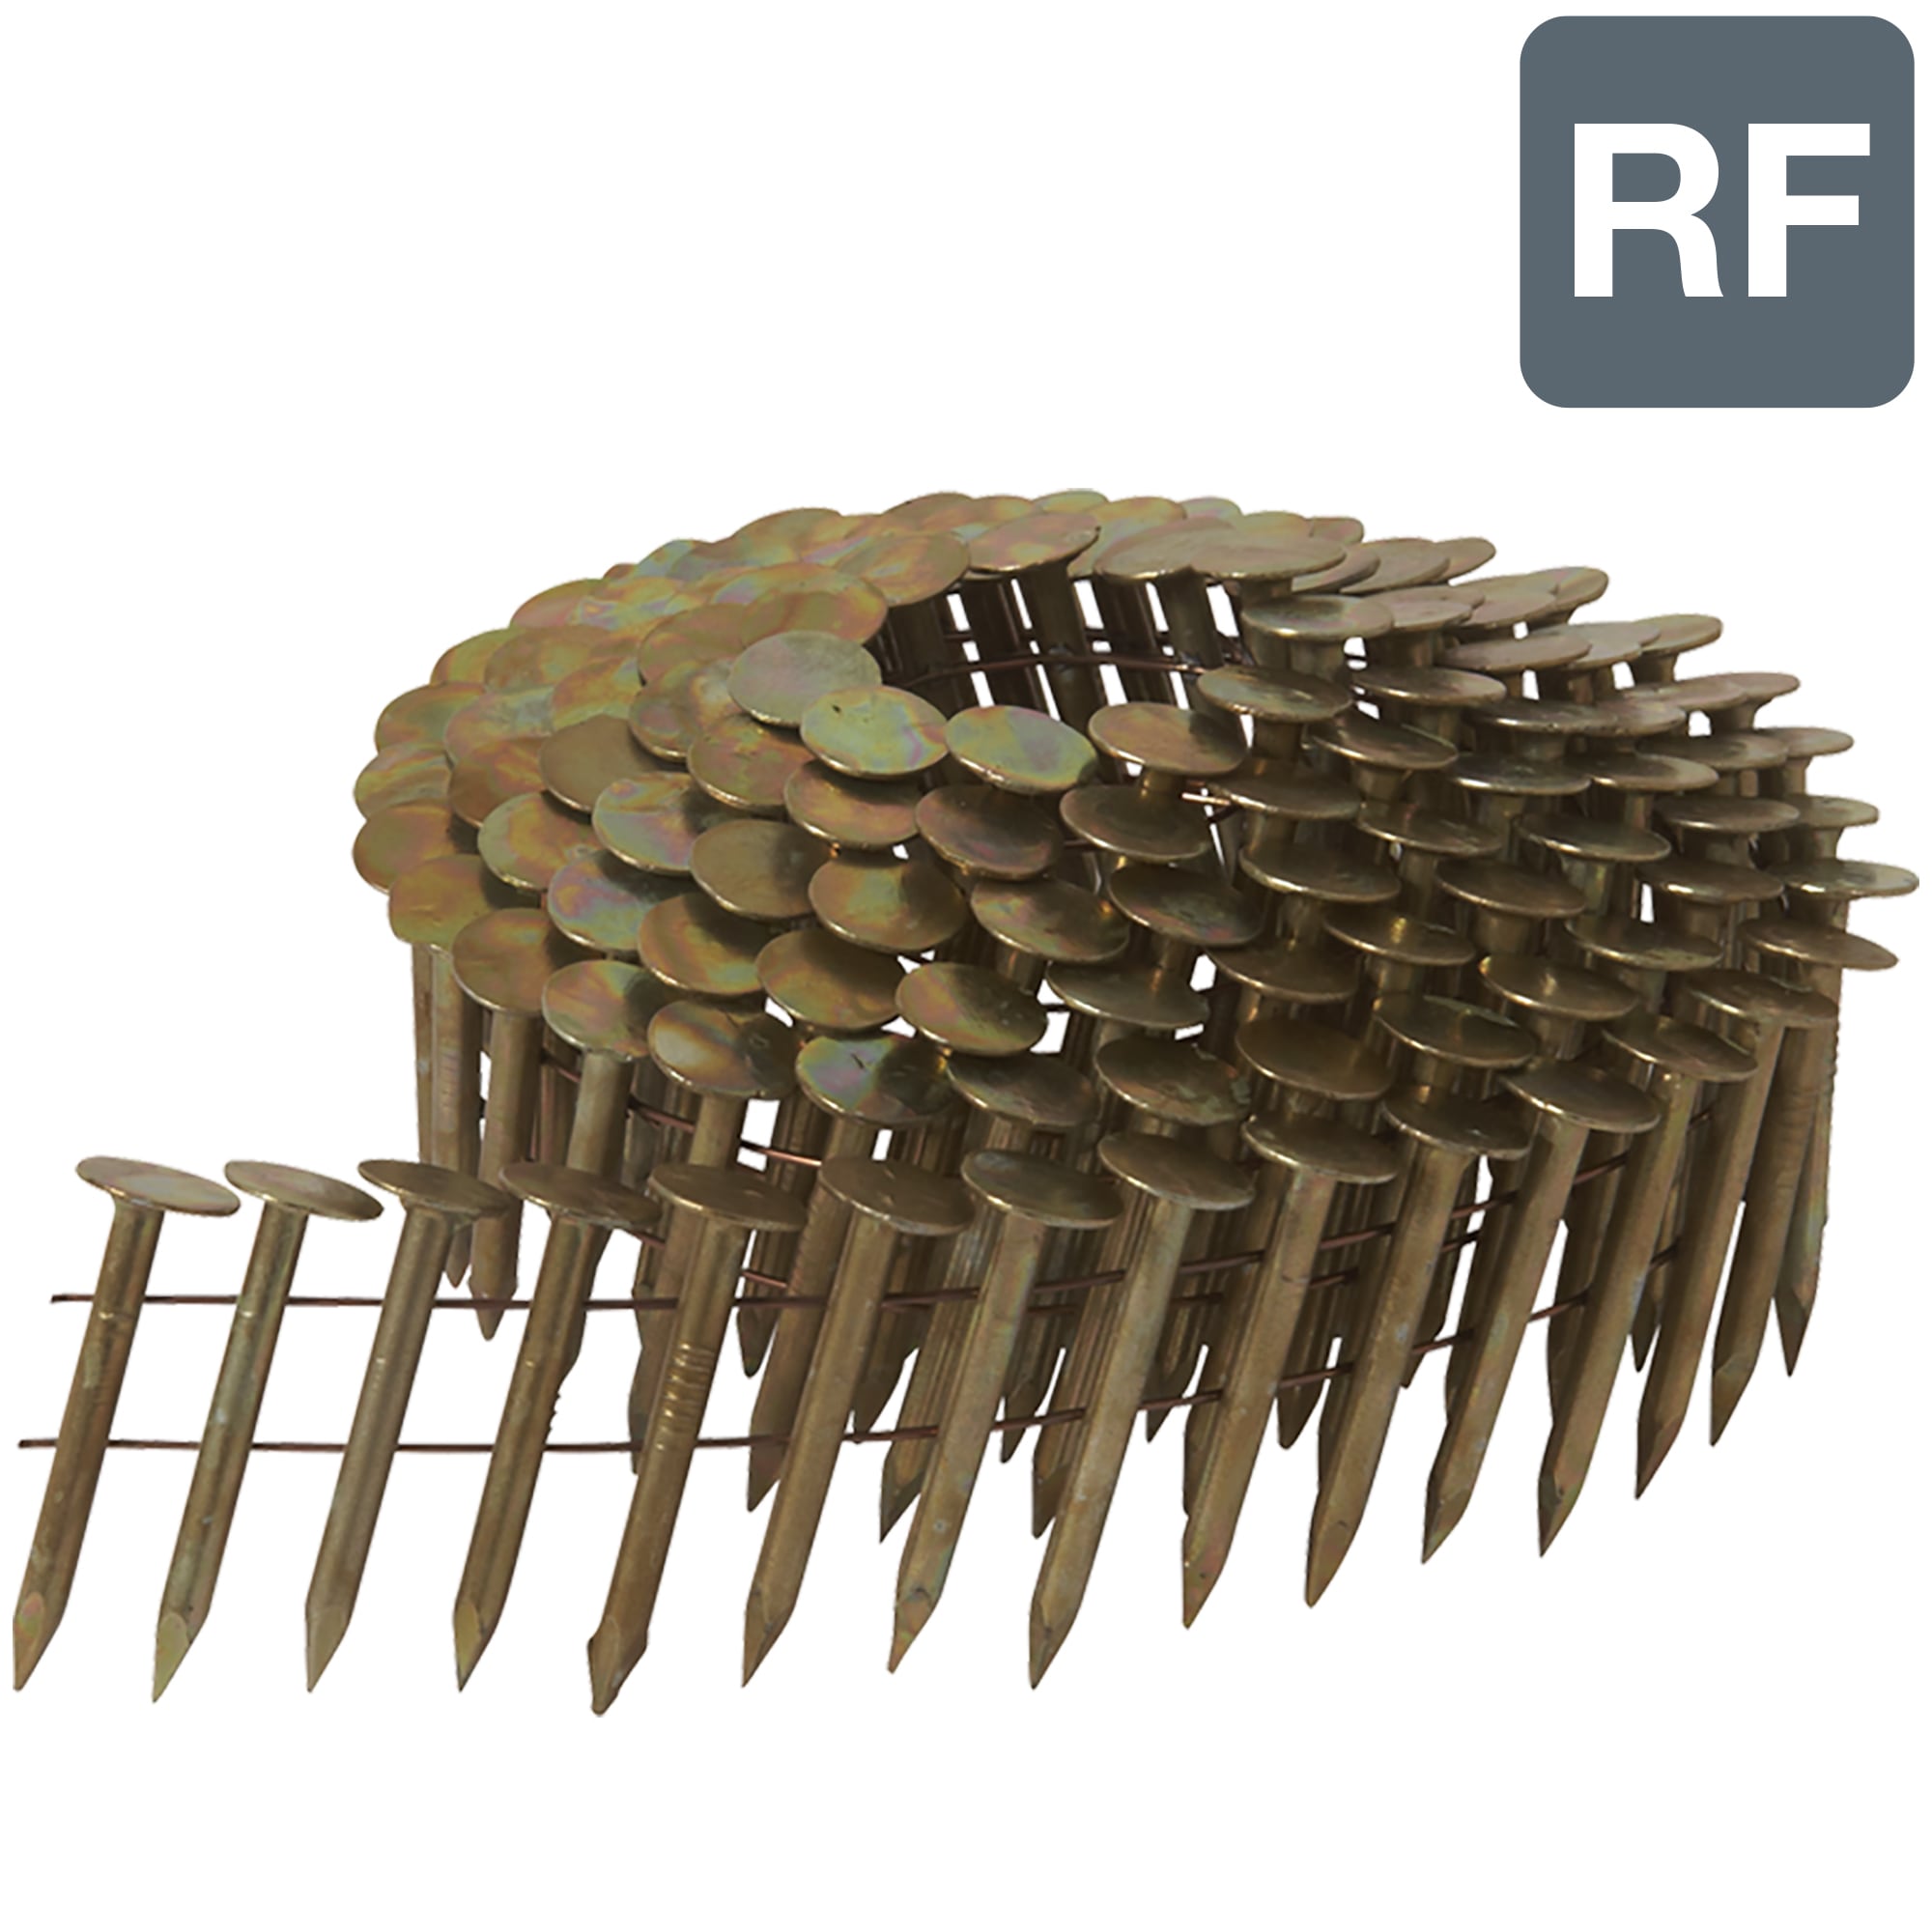 Amazon.com: (500-Pack) 3/4-Inch Galvanized Roofing Nails Professional Grade  - .75 Inch Used to fasten roofing felt, asphalt singles & insulation board  (500) : Industrial & Scientific